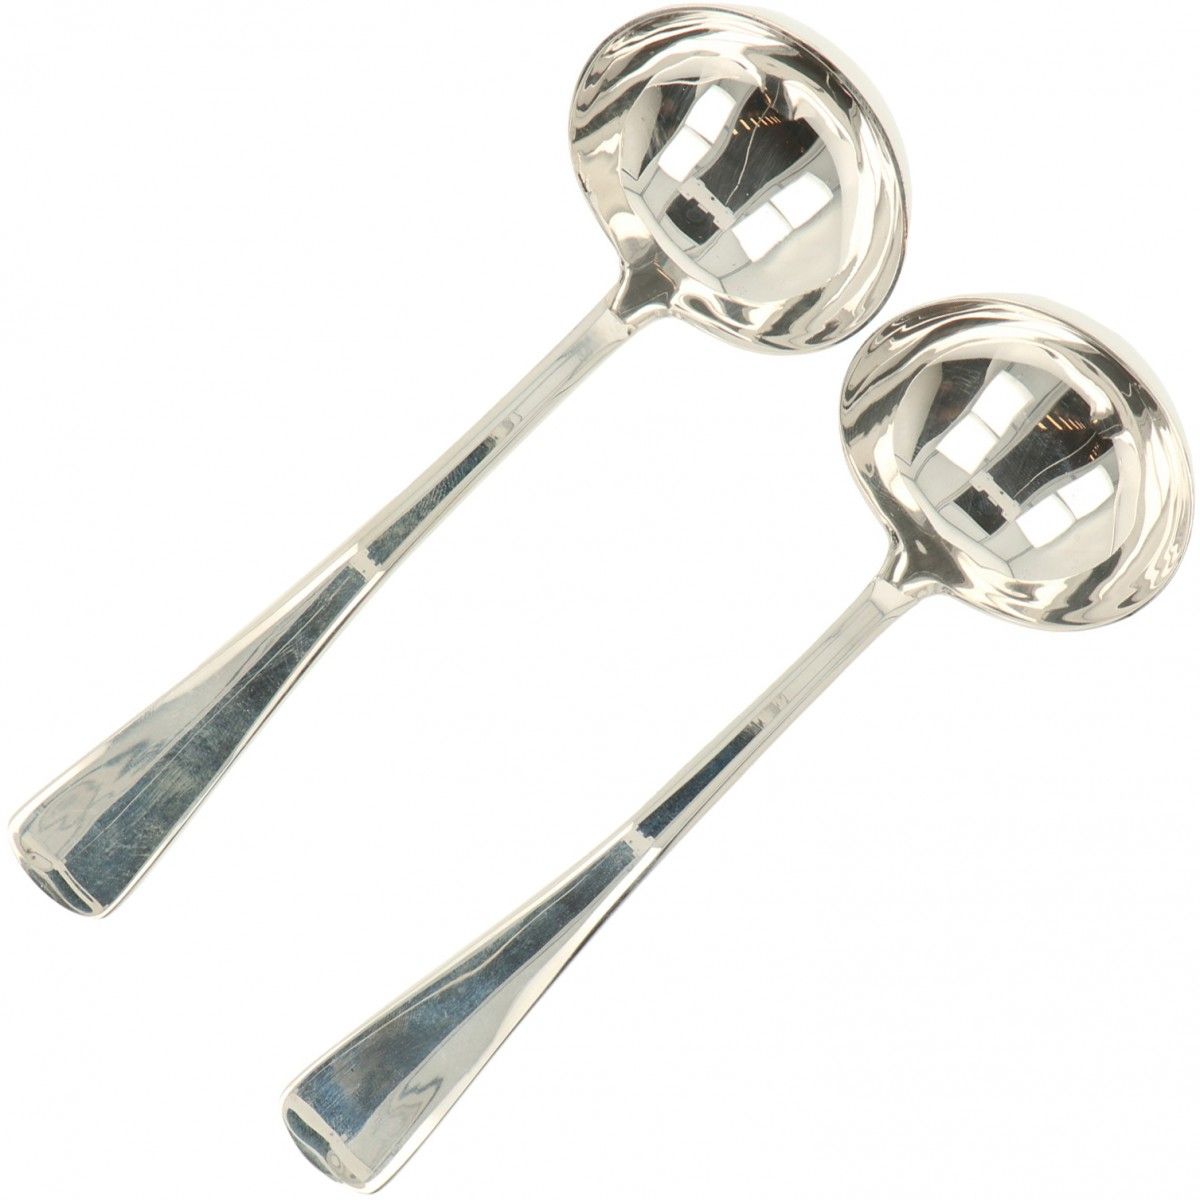 (2) Piece set Sauce spoons "Haags Lofje" silver. "Haags Lofje", in condizioni nu&hellip;